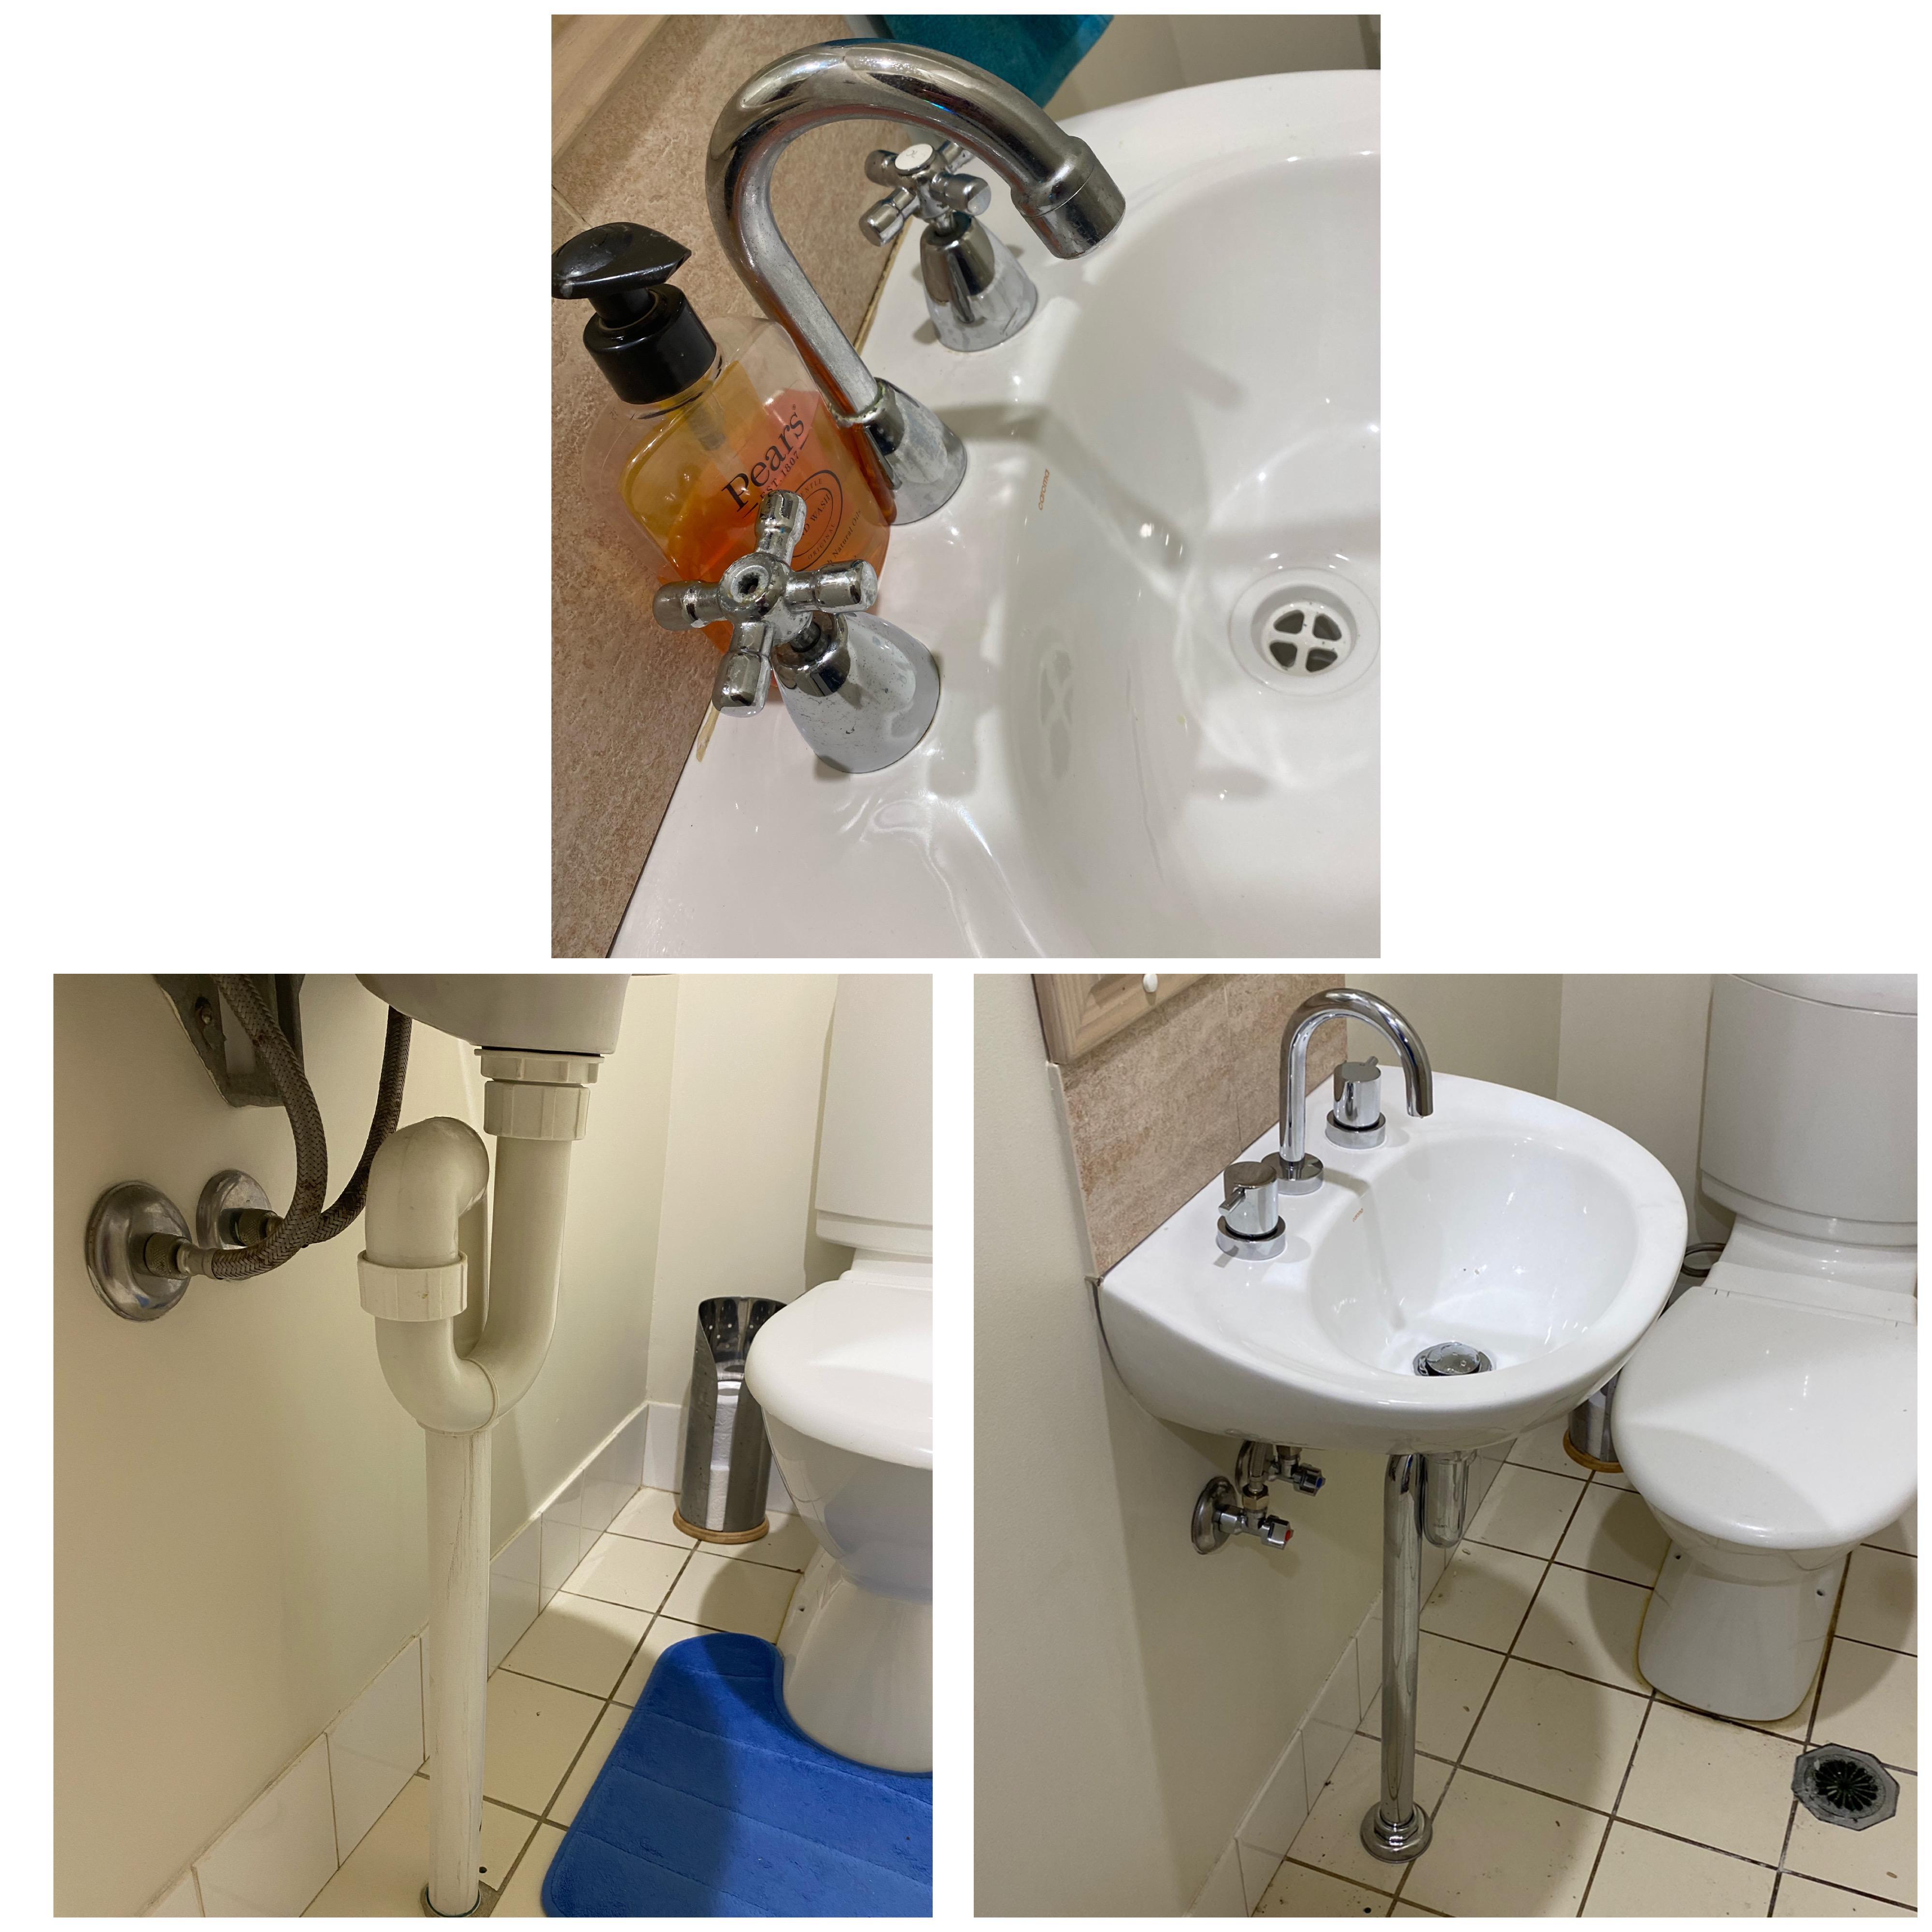 BASIN TAPWARE REPLACEMENT CRUCIAL Plumbing Services Pty Ltd Seven Hills (02) 8041 4999